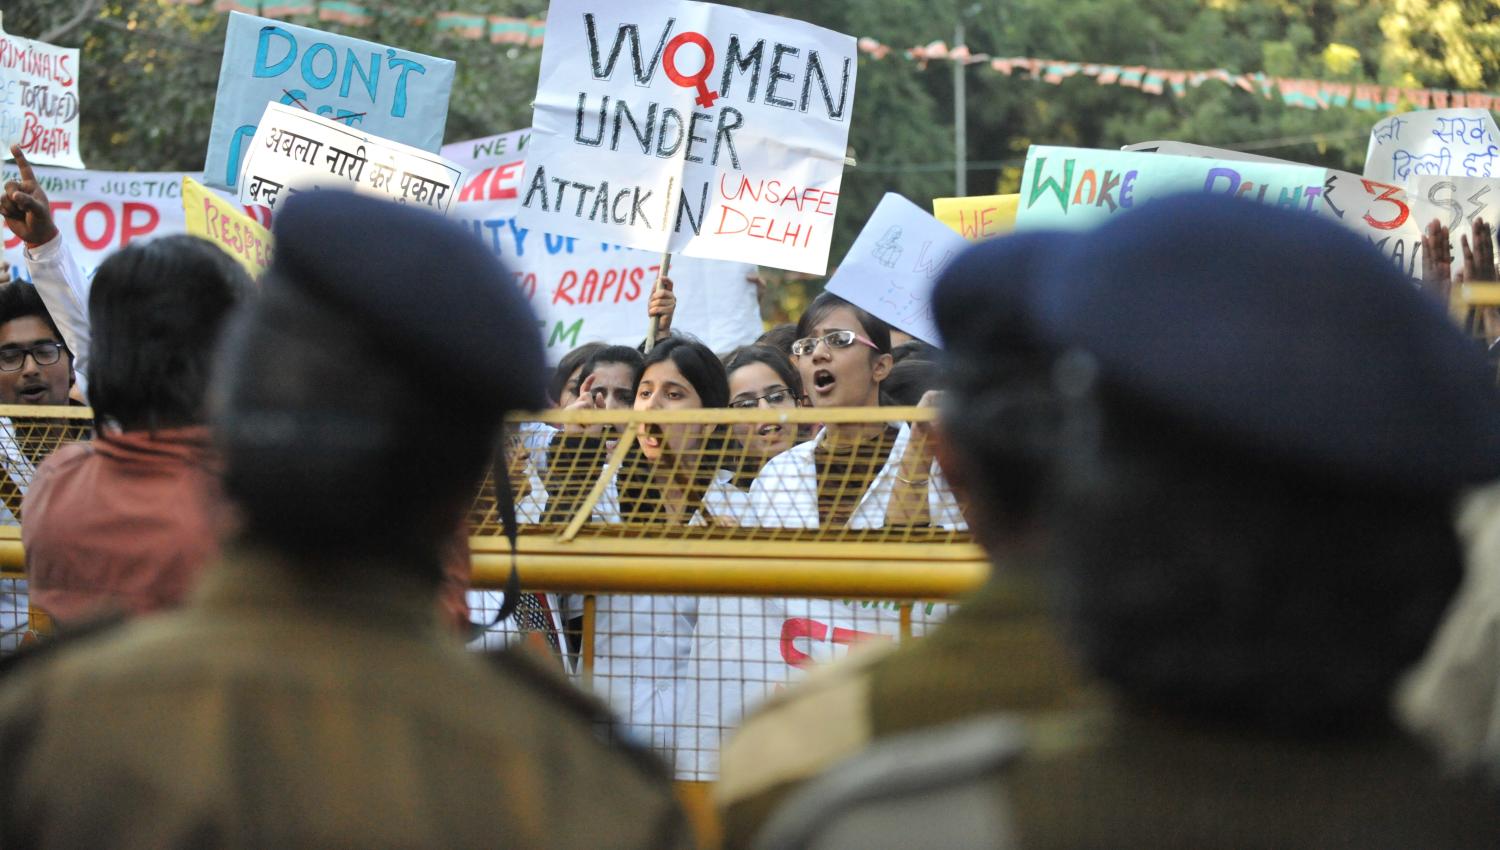 A rally in 2012 protesting the gang rape and assault of Jyoti Singh, who later died of her injuries (Photo: Getty Images/Barcroft Media) 